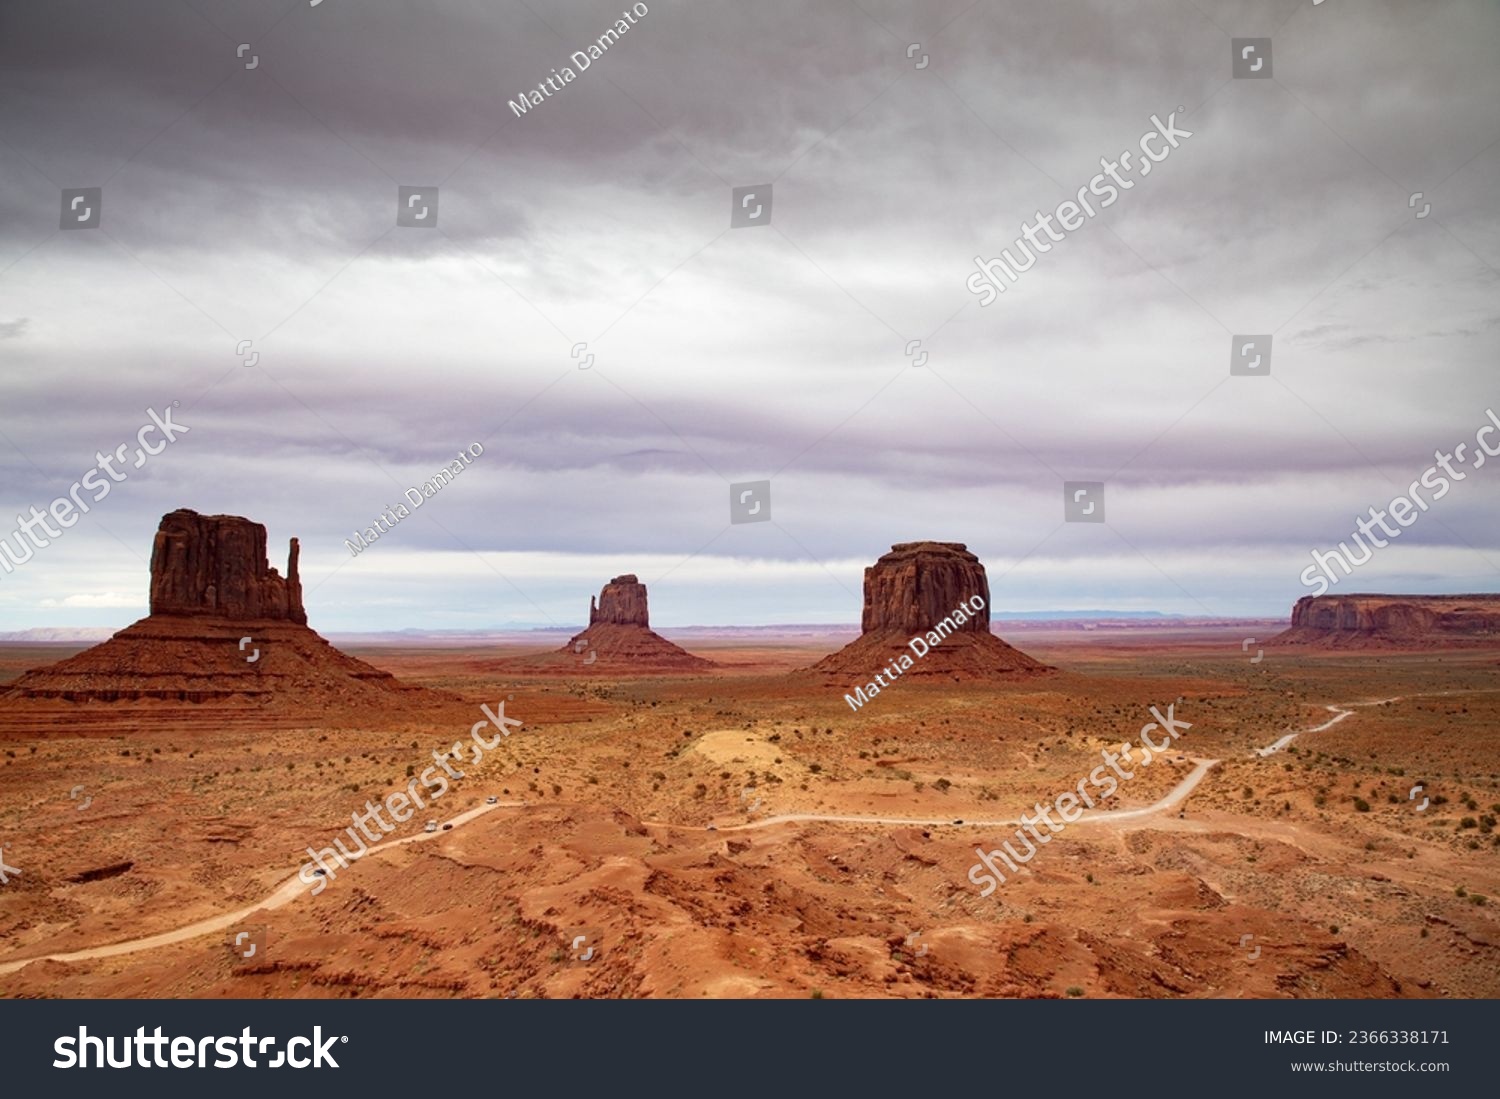 Monument Valley, USA.
The house of western #2366338171